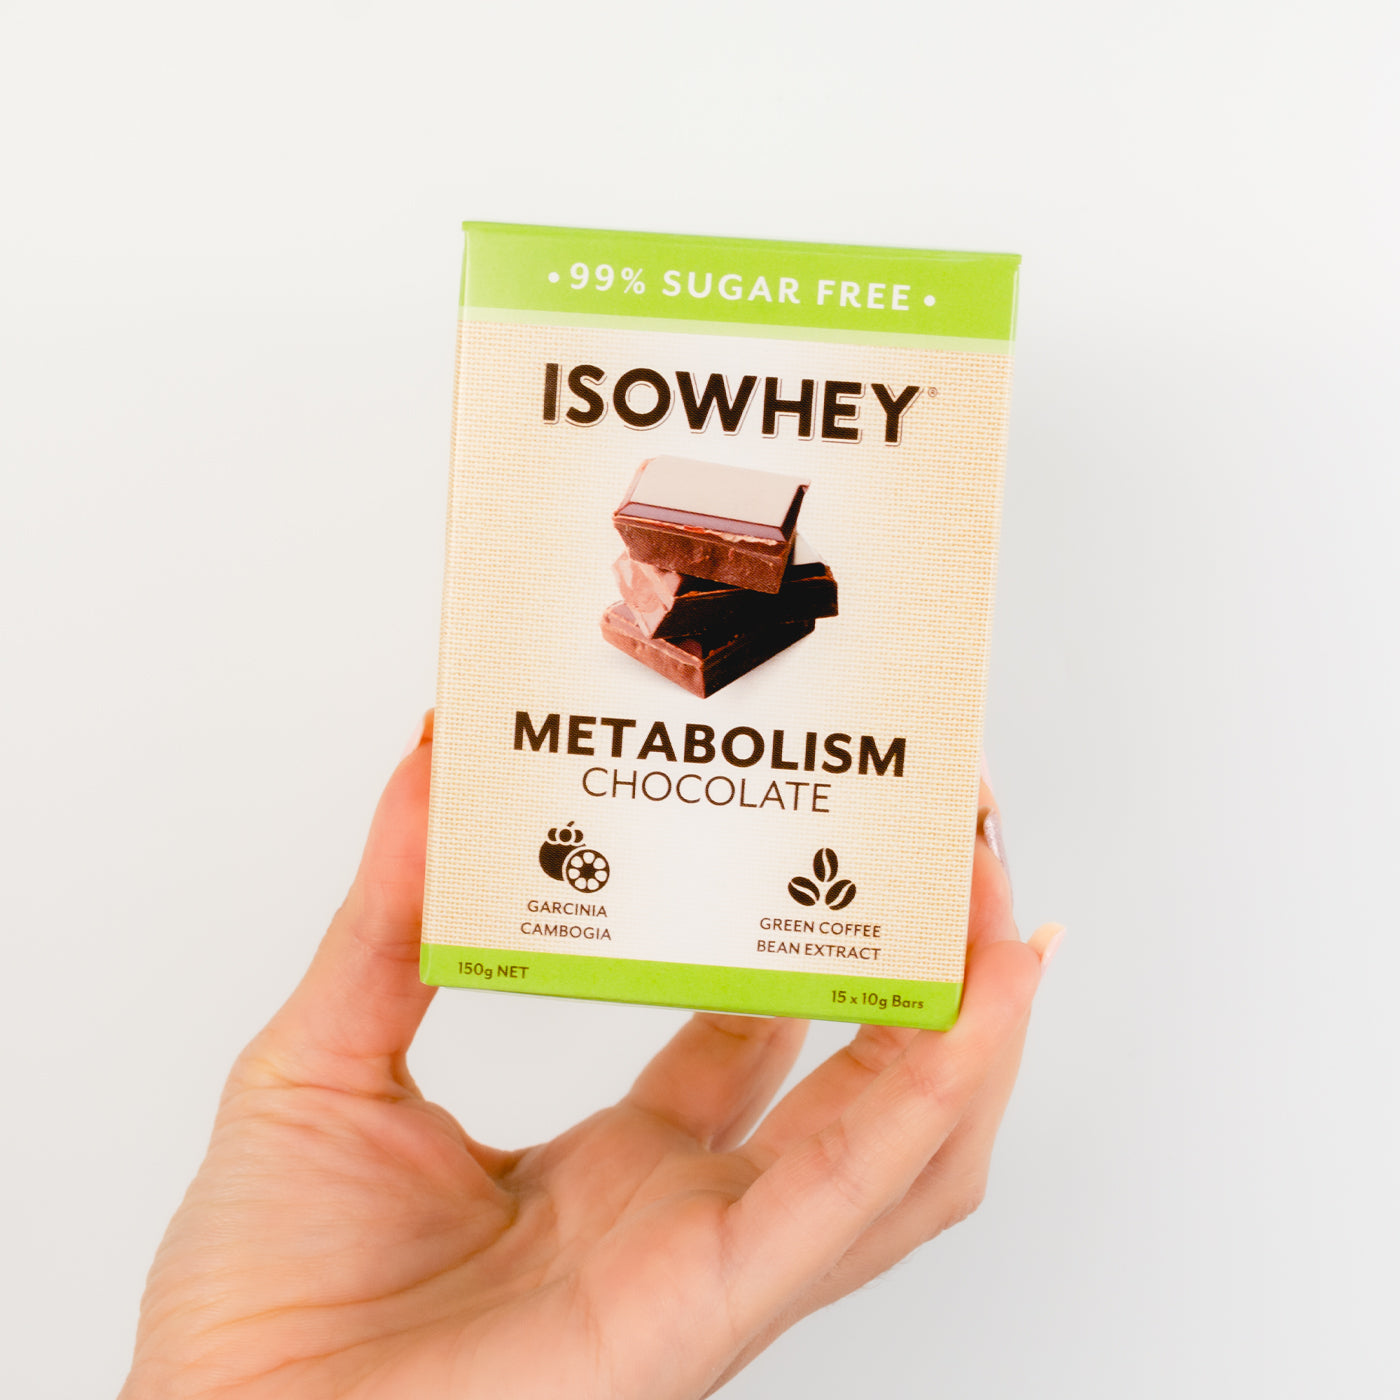 A Box IsoWhey Metabolism Chocolate 15x10g Held By Hand